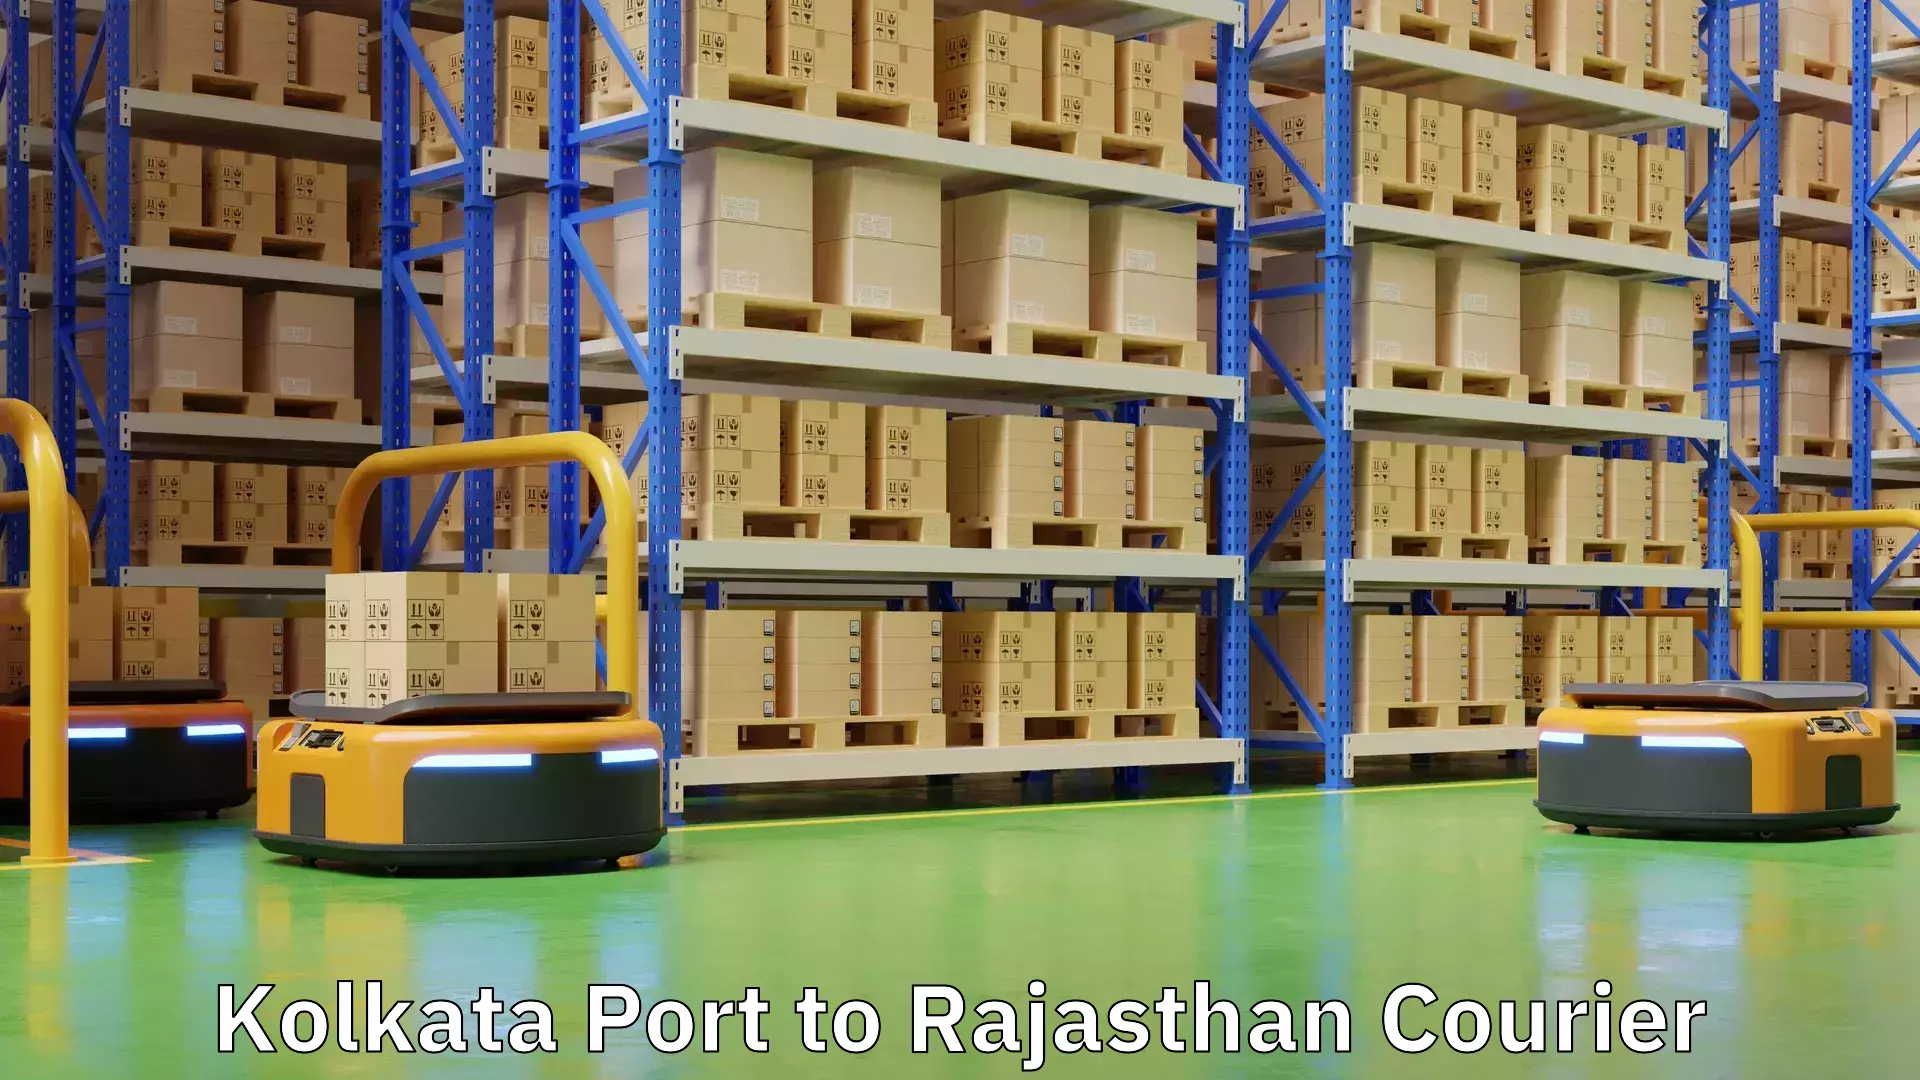 Expedited parcel delivery in Kolkata Port to Rajasthan